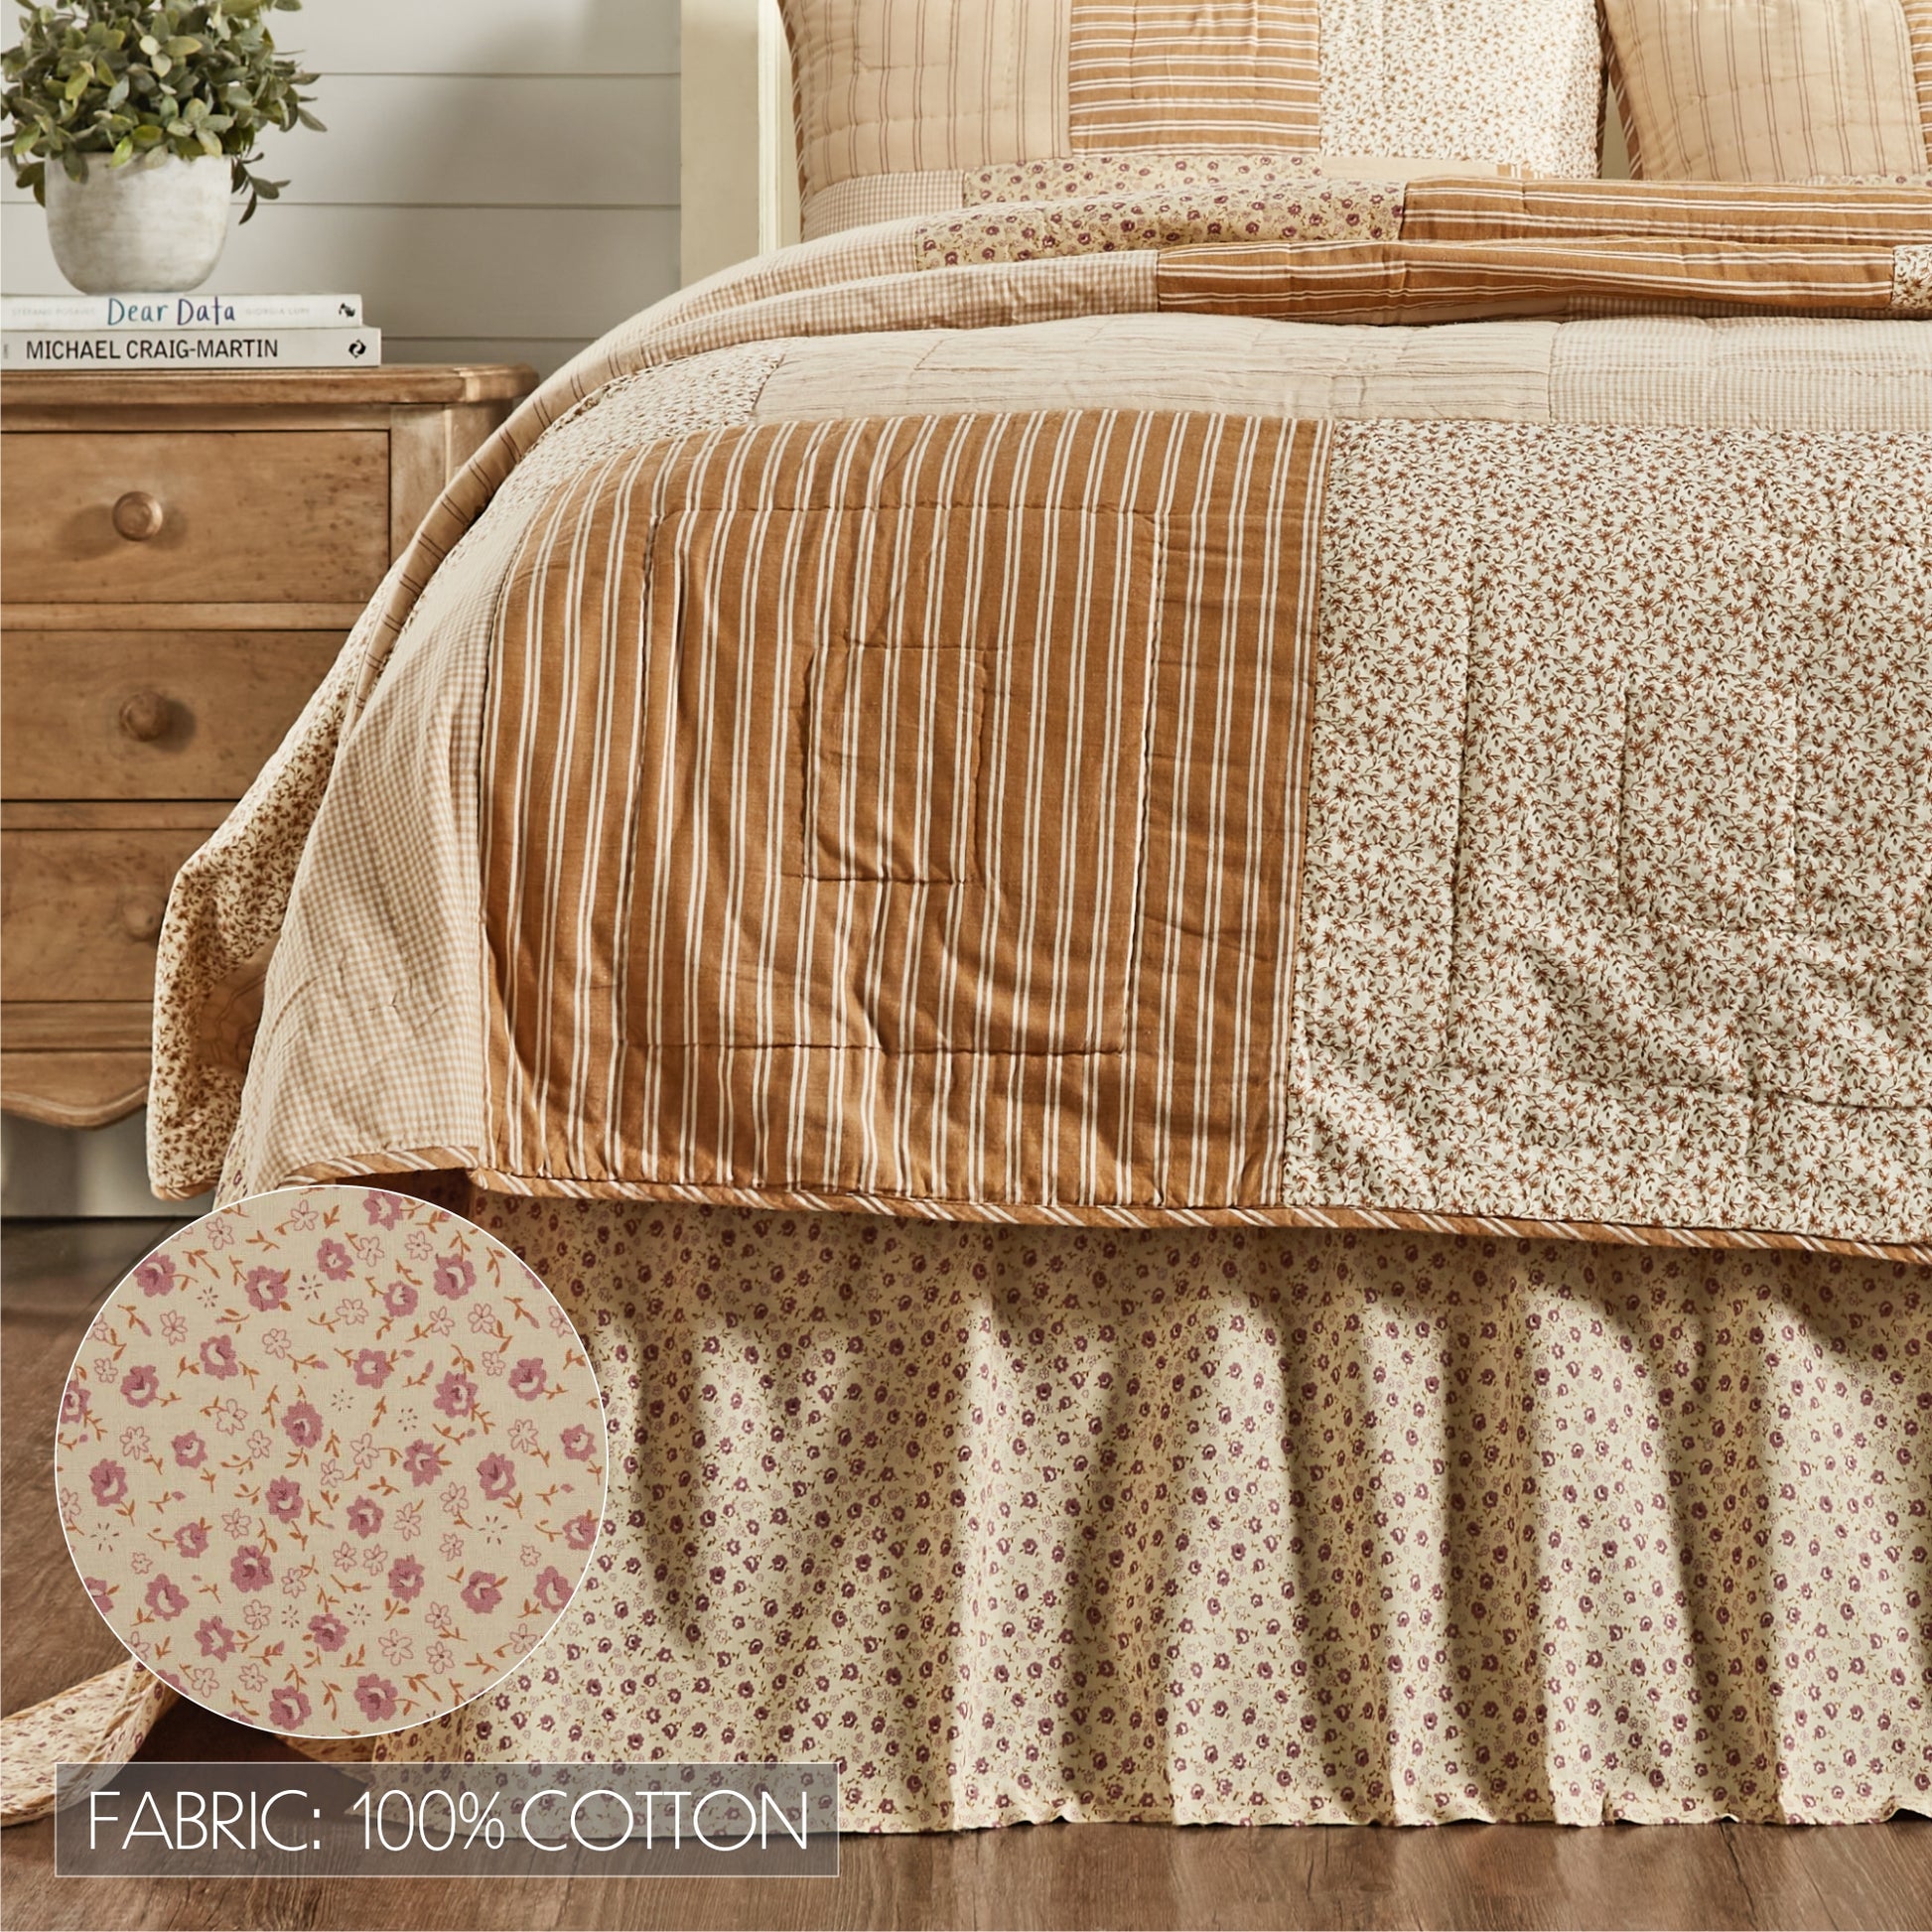 70076-Camilia-King-Bed-Skirt-78x80x16-image-4